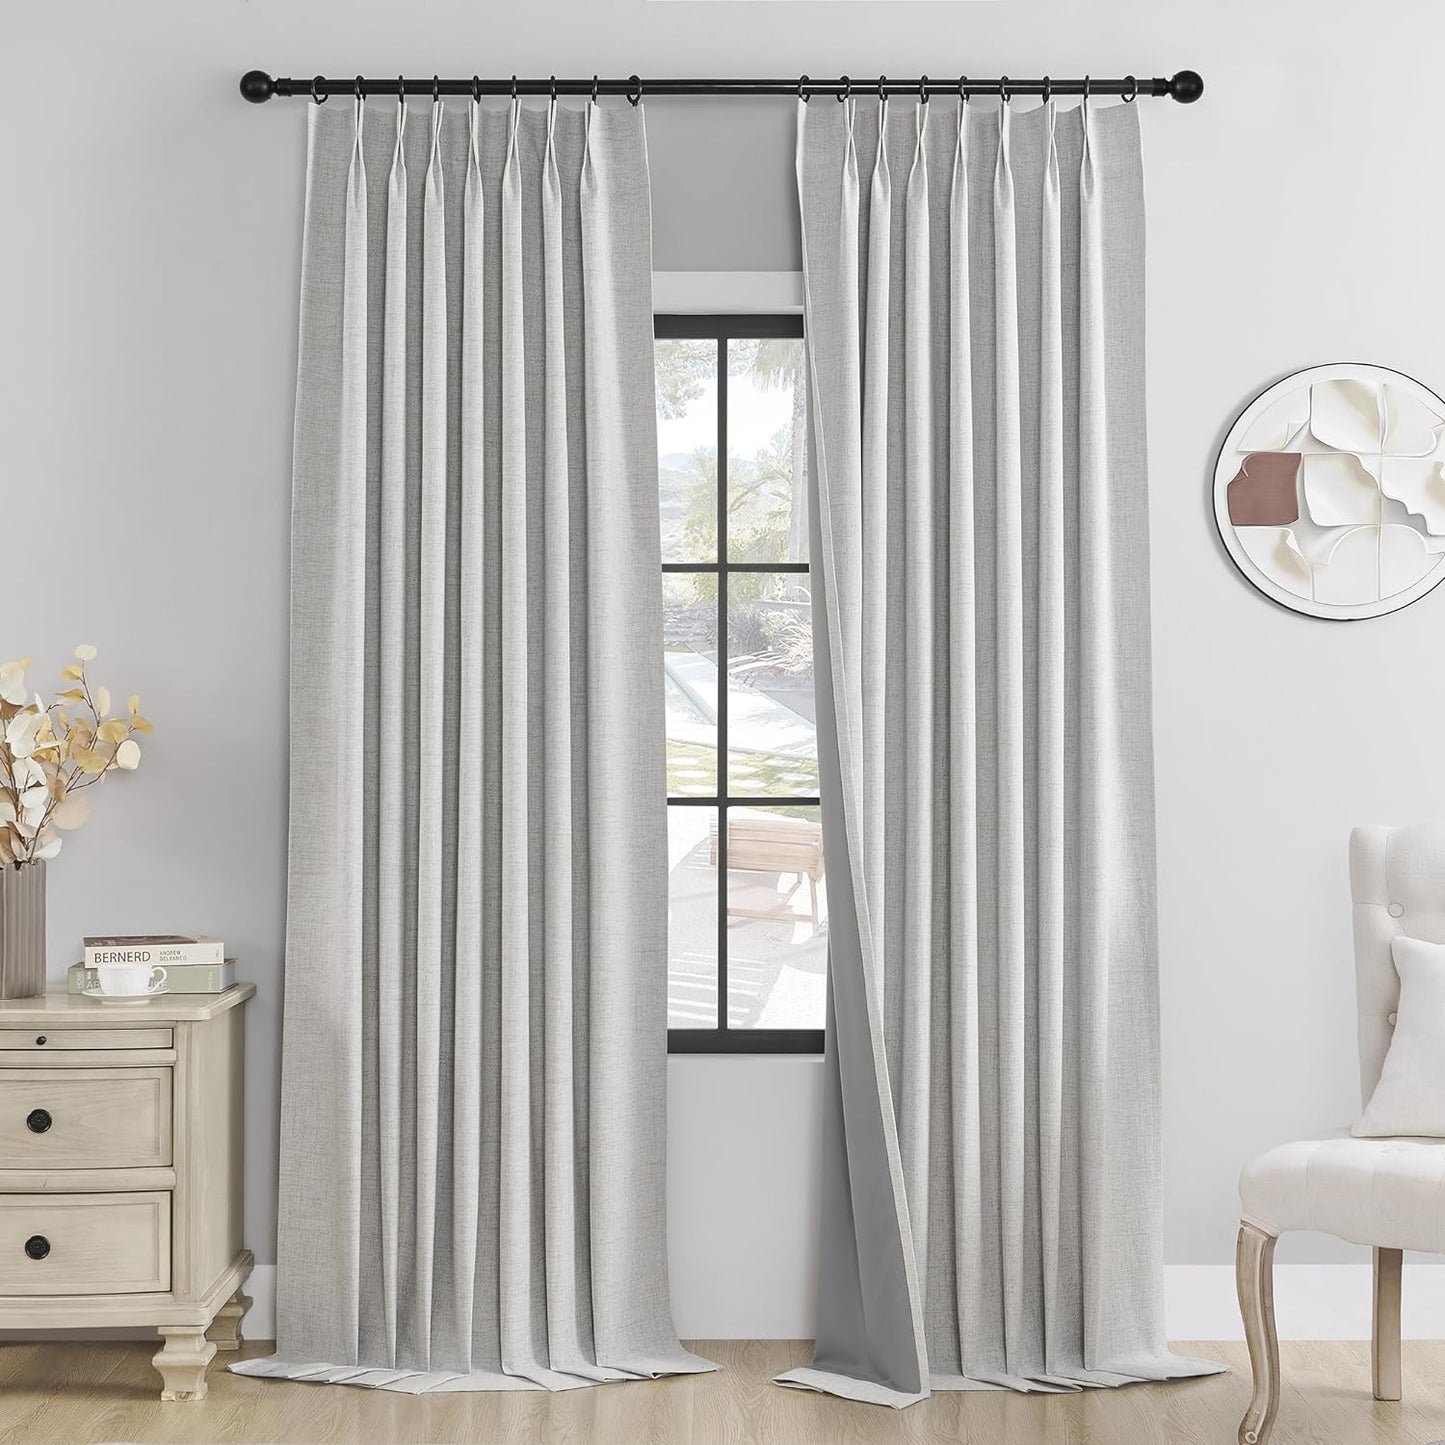 Full Blackout Curtains Back Tab Pinch Pleat Curtains 108 Inches Long for Living Room, Natural Linen Blended Thermal Insulated Patio Door Pleated Drapes with Hooks, 40" W X 108" L, 1 Panel  Cniuyhi   